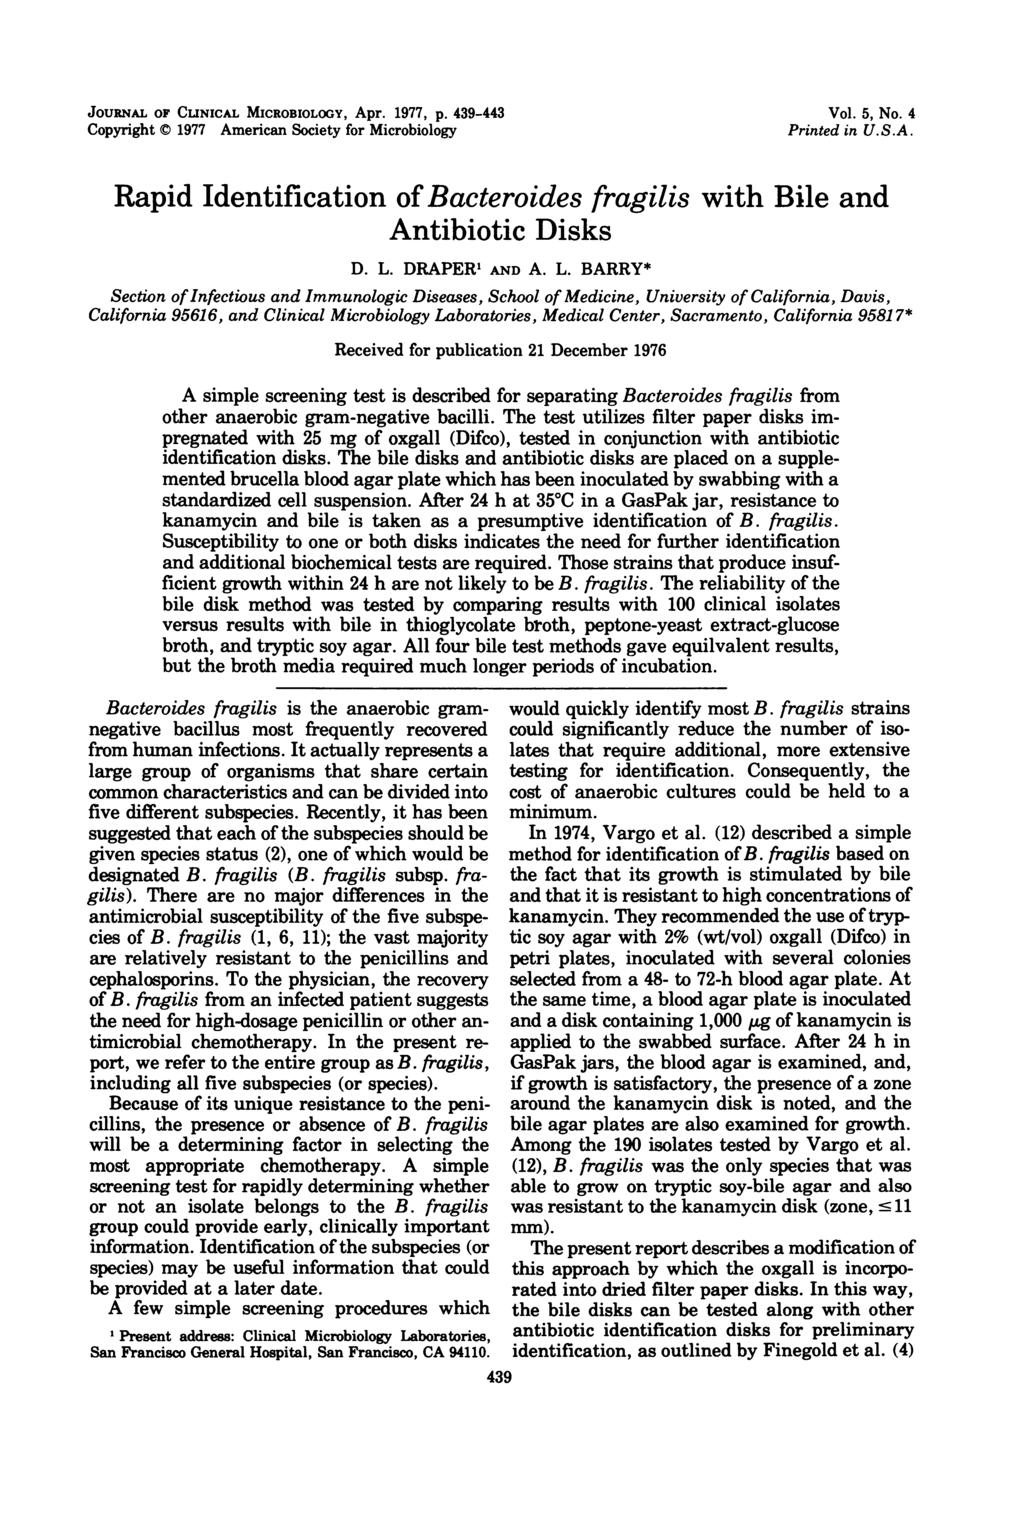 JOURNAL OF CuNICAL MICROBIOLOGY, Apr. 1977, p. 439-443 Copyright C 1977 American Society for Microbiology Vol. 5, No. 4 Printed in U.S.A. Rapid Identification of Bacteroides fragilis with Bile and Antibiotic Disks D.